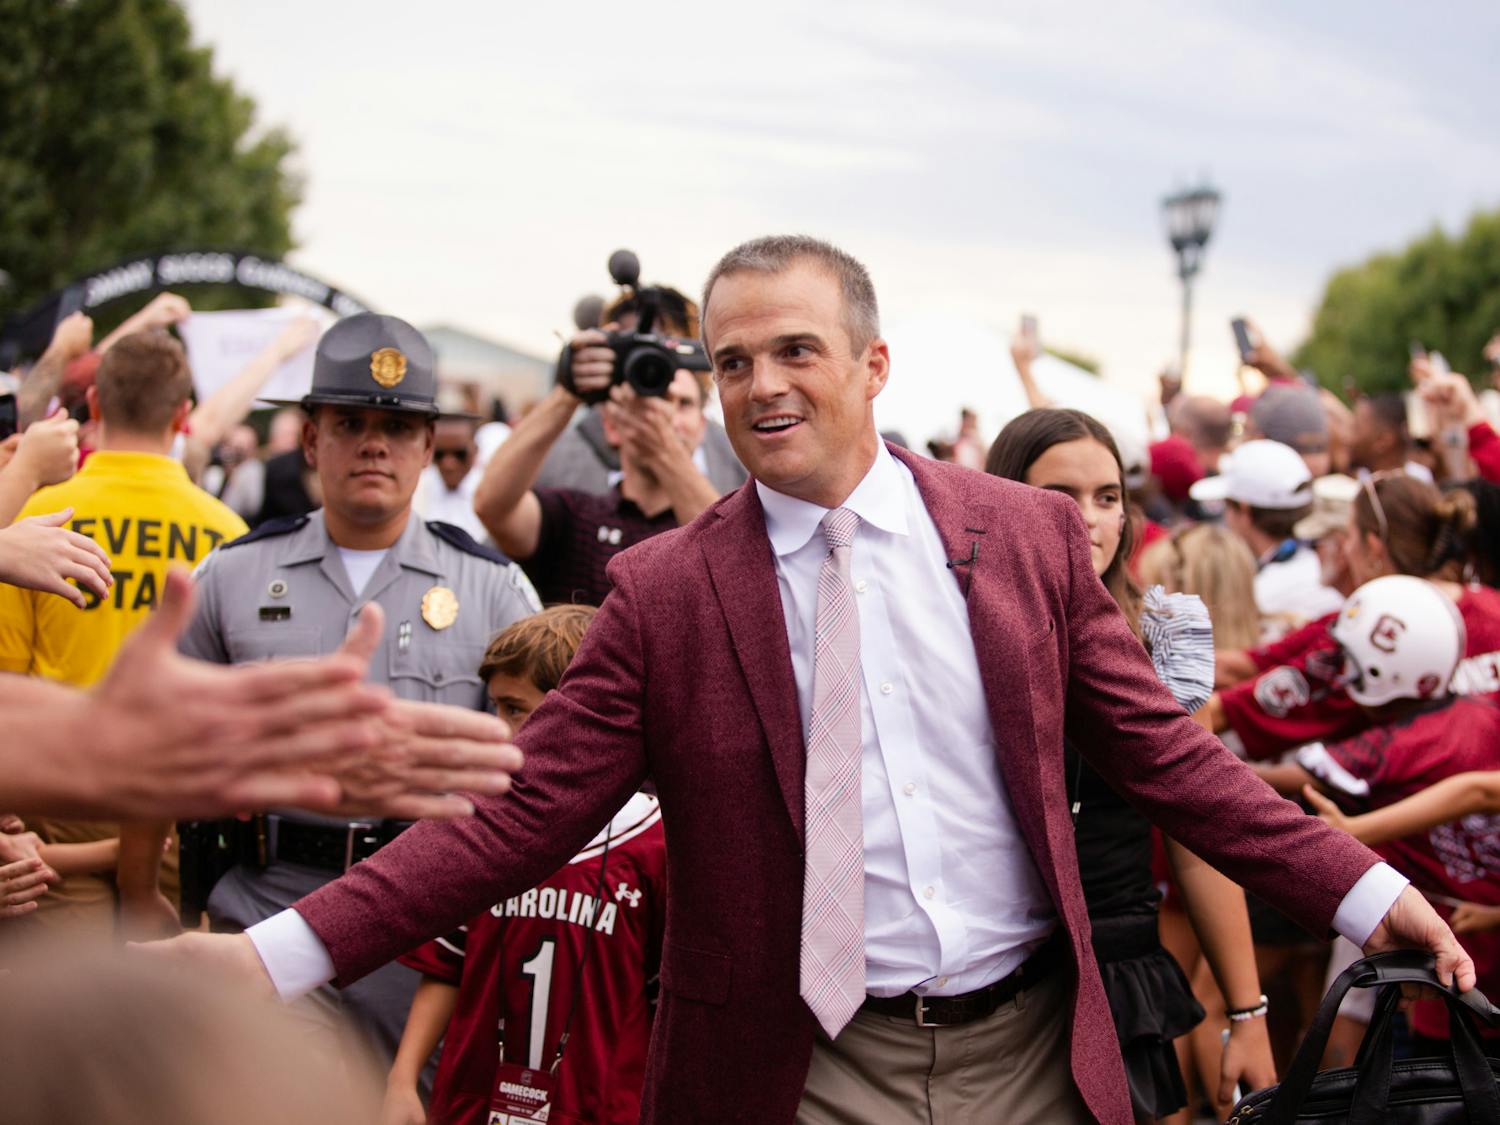 Head coach Shane Beamer high fives fans during while heading into the Williams-Brice Stadium on Sept. 3, 2022. Beamer led his team to a 35-14 win against Georgia State.&nbsp;